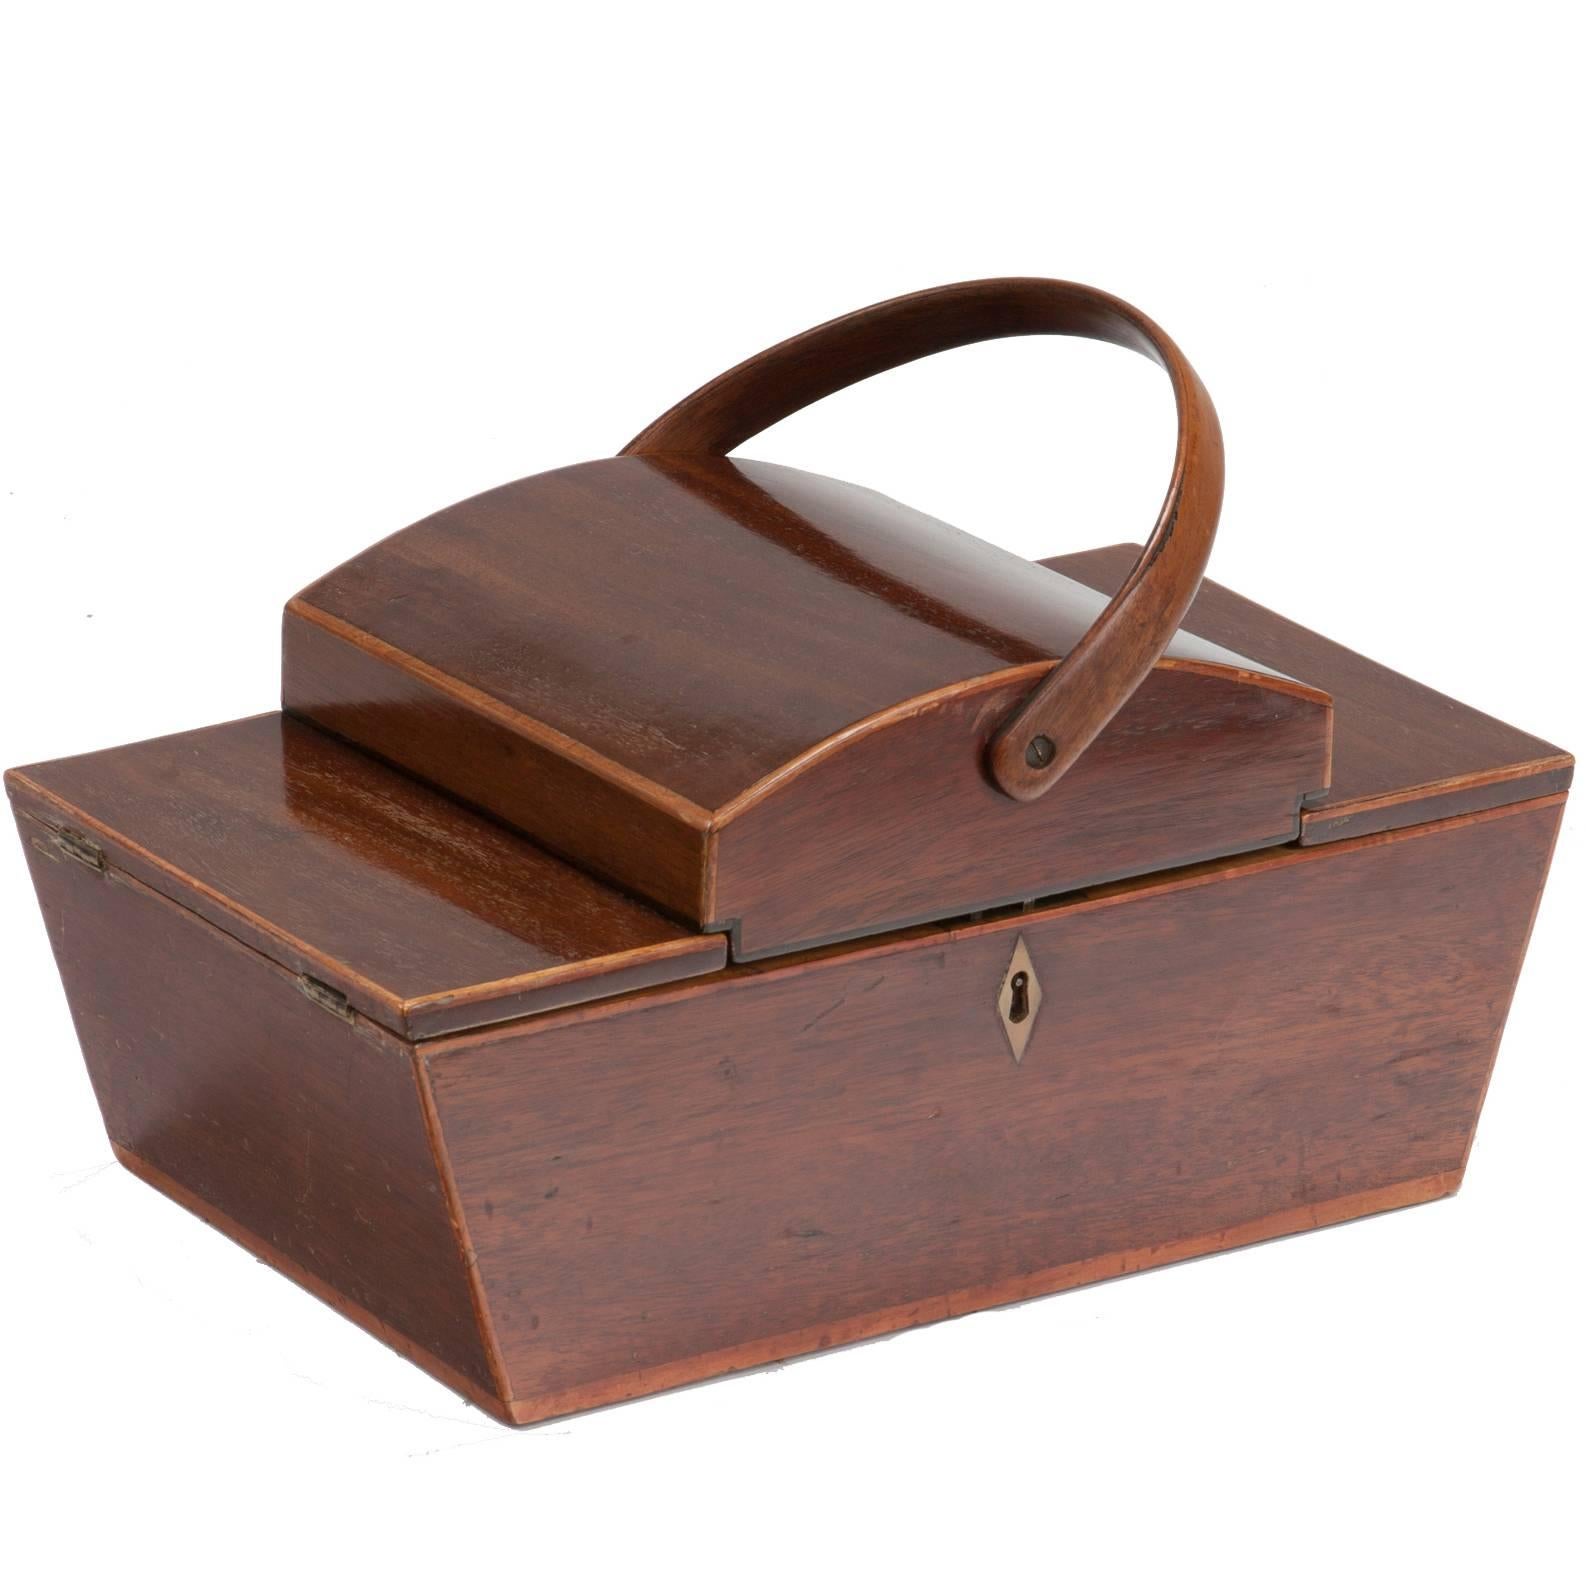 Decorative Mahogany Box with Dome Top and Handle from England Circa 1820